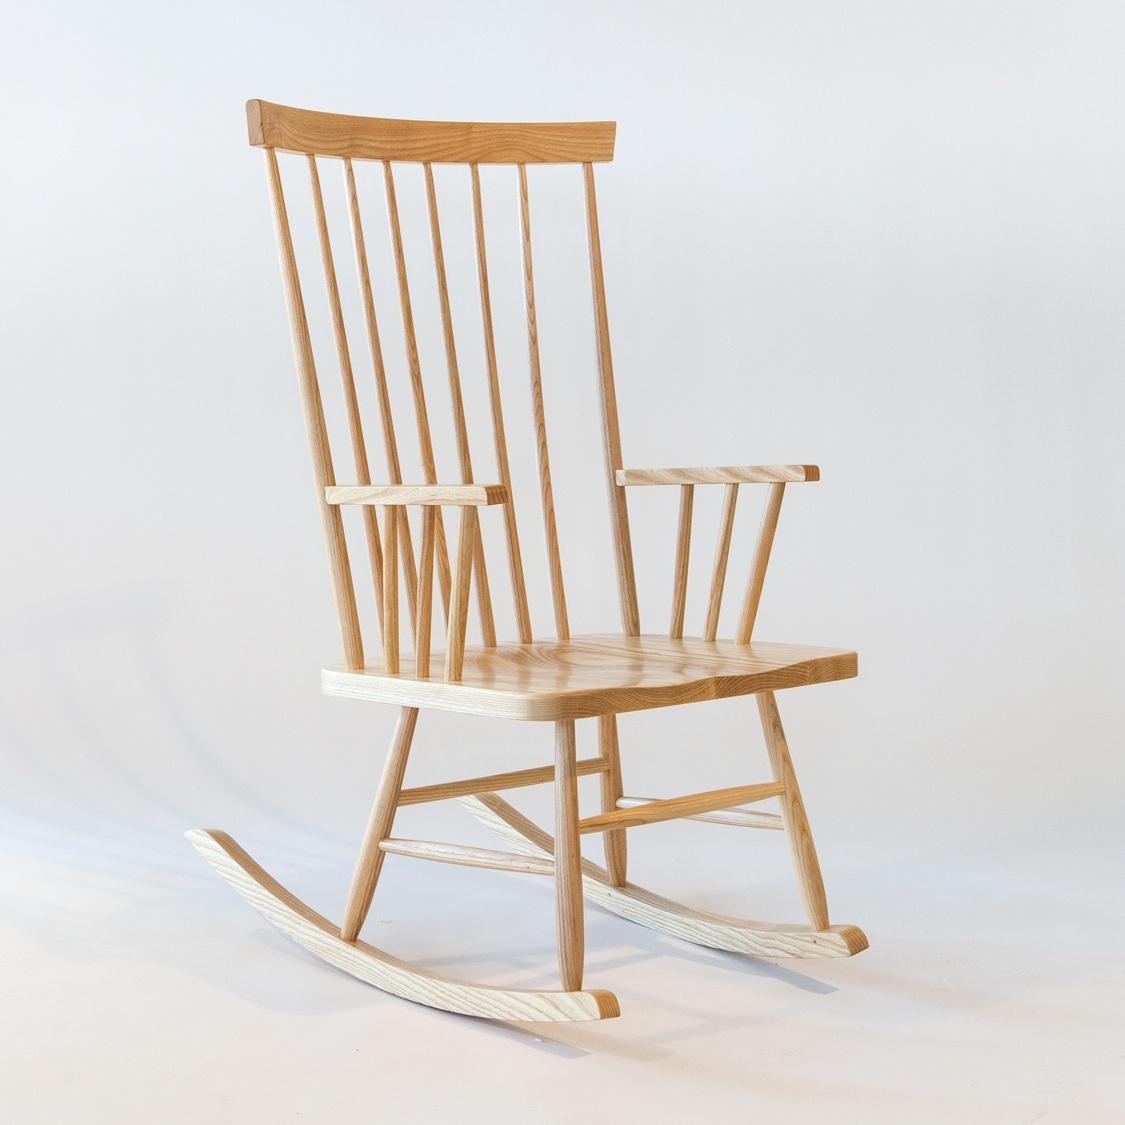 American Classic Rocking Chair with leather cushion in Ash by Mel Smilow